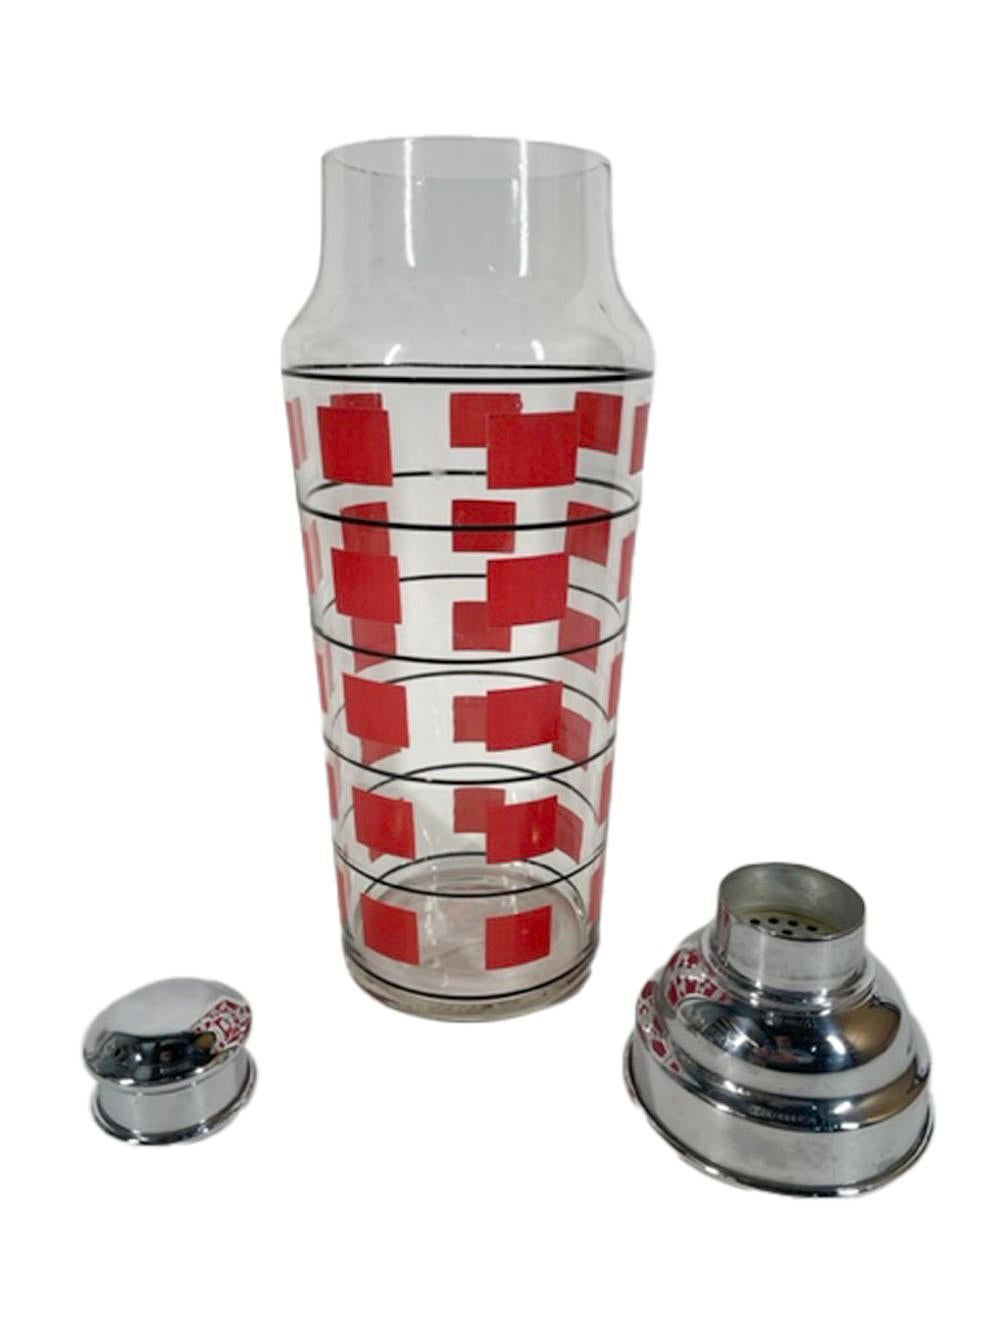 American Art Deco Cocktail Shaker with Bands of Red Squares Between Black Lines For Sale